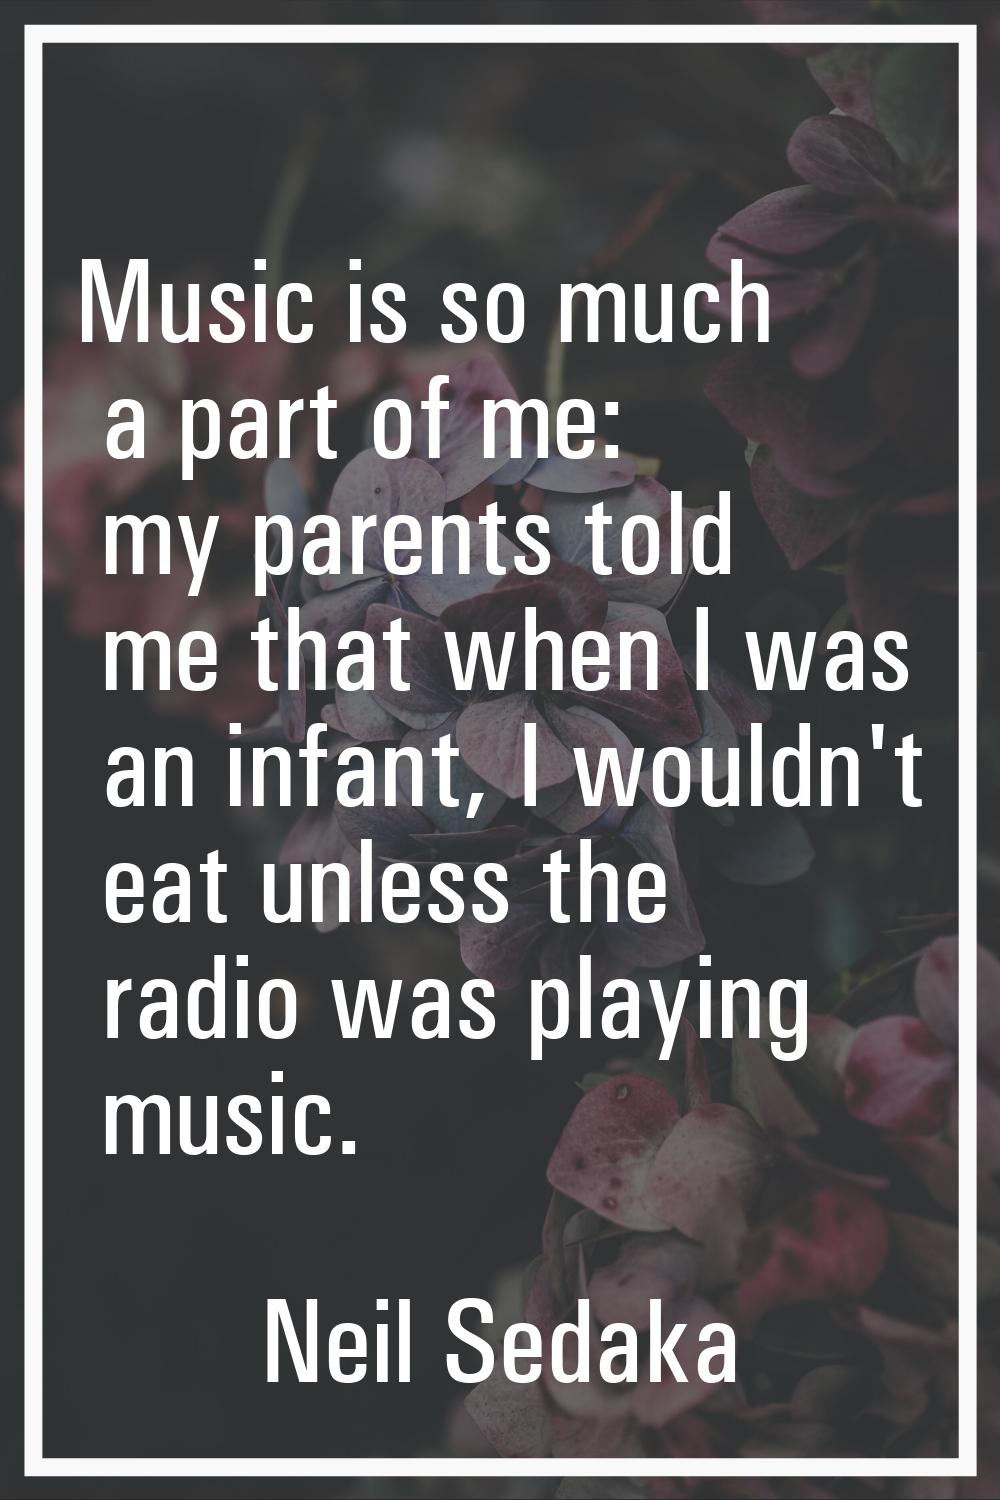 Music is so much a part of me: my parents told me that when I was an infant, I wouldn't eat unless 